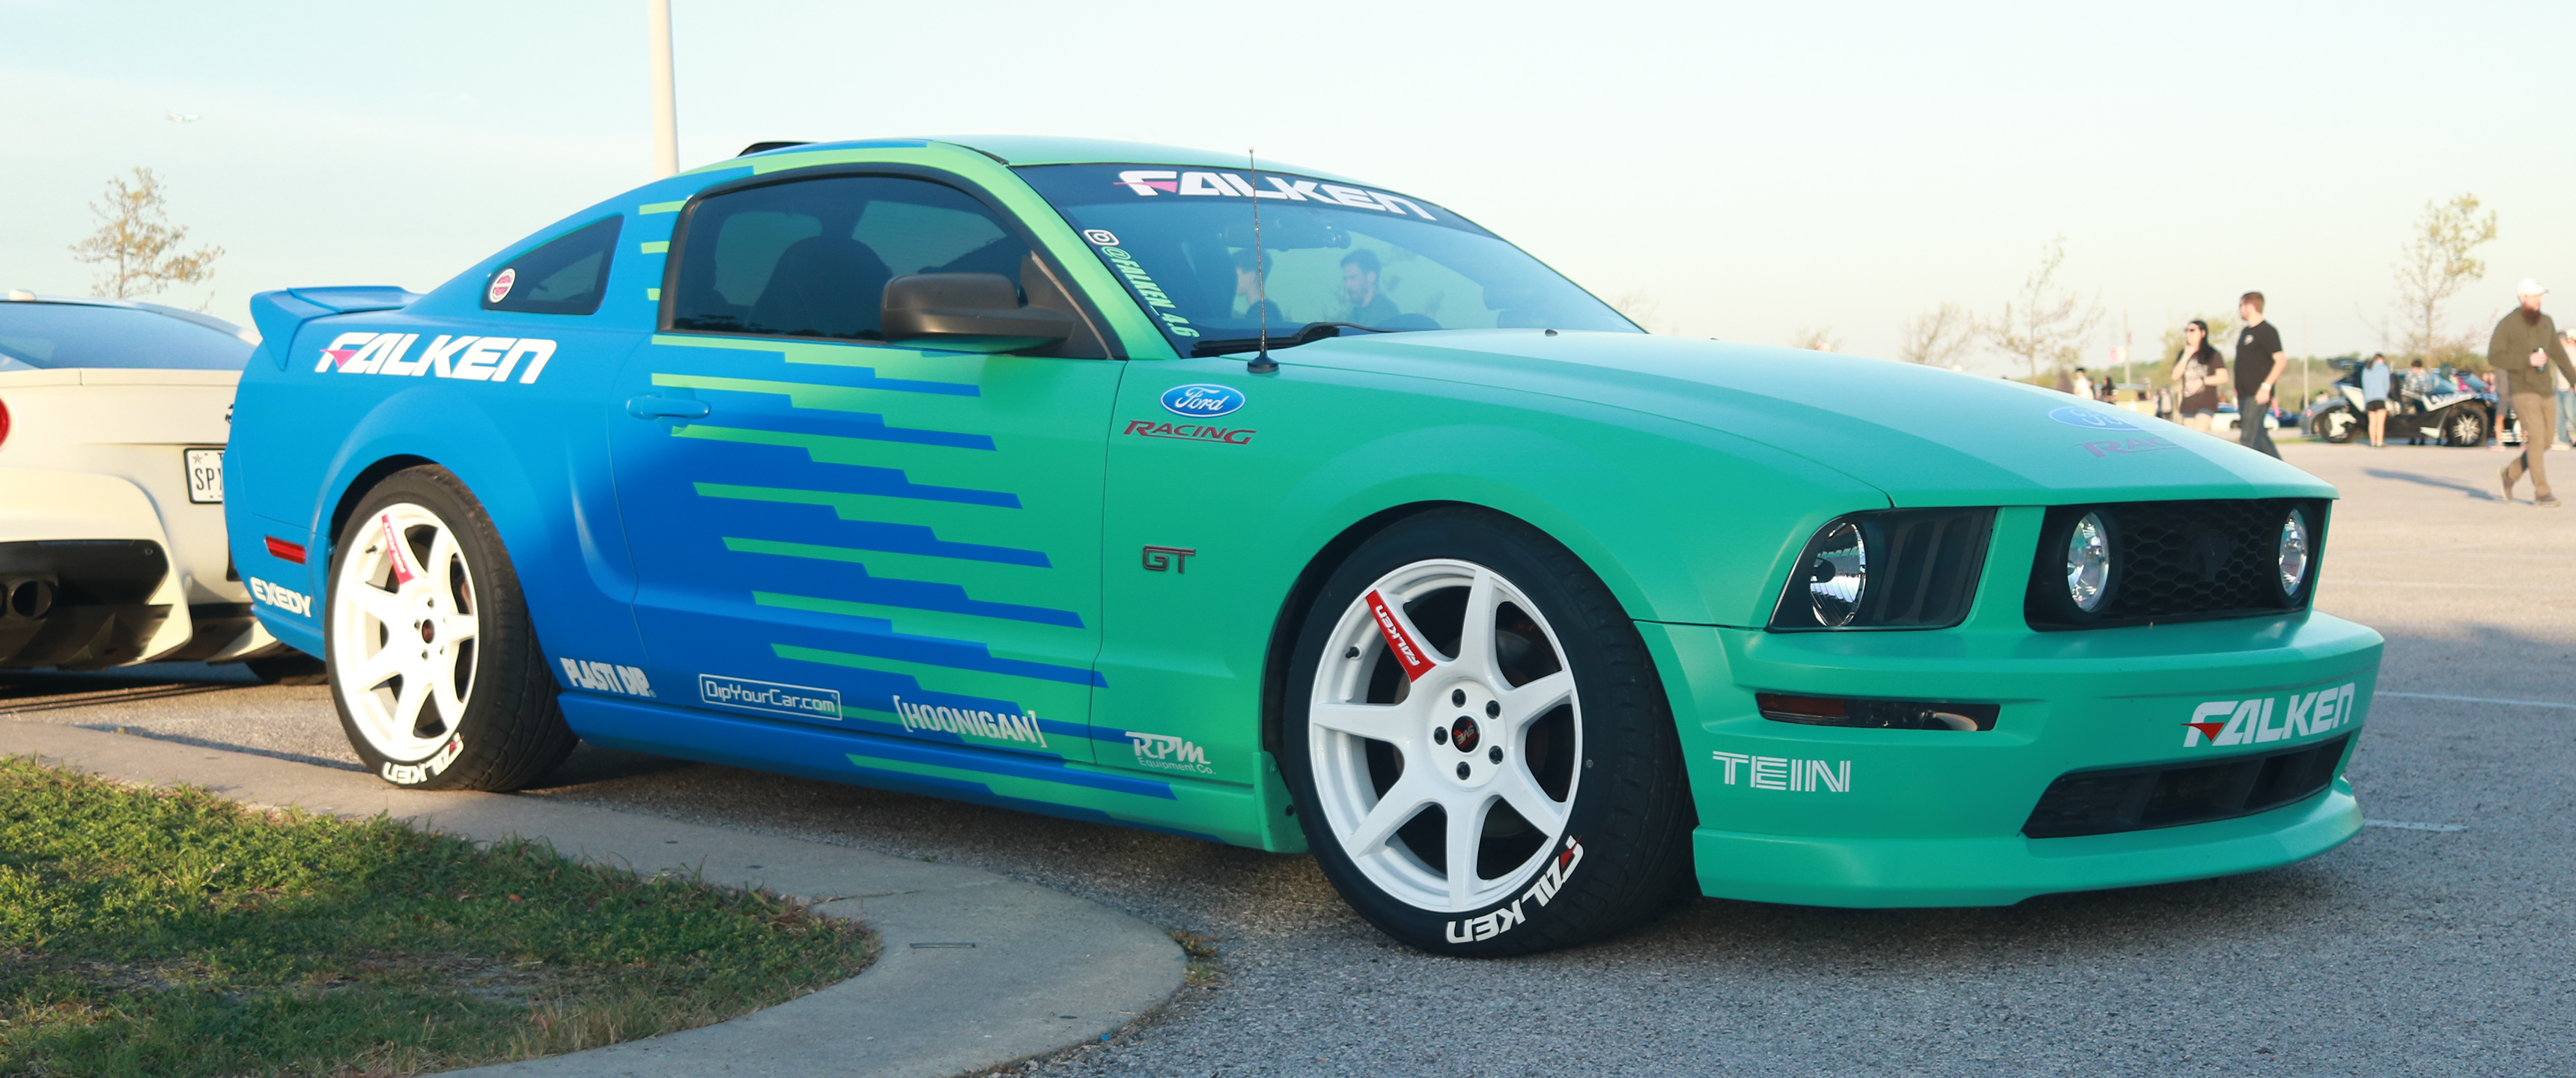 Car Stance Cars Ford Mustang Side View 3440x1440